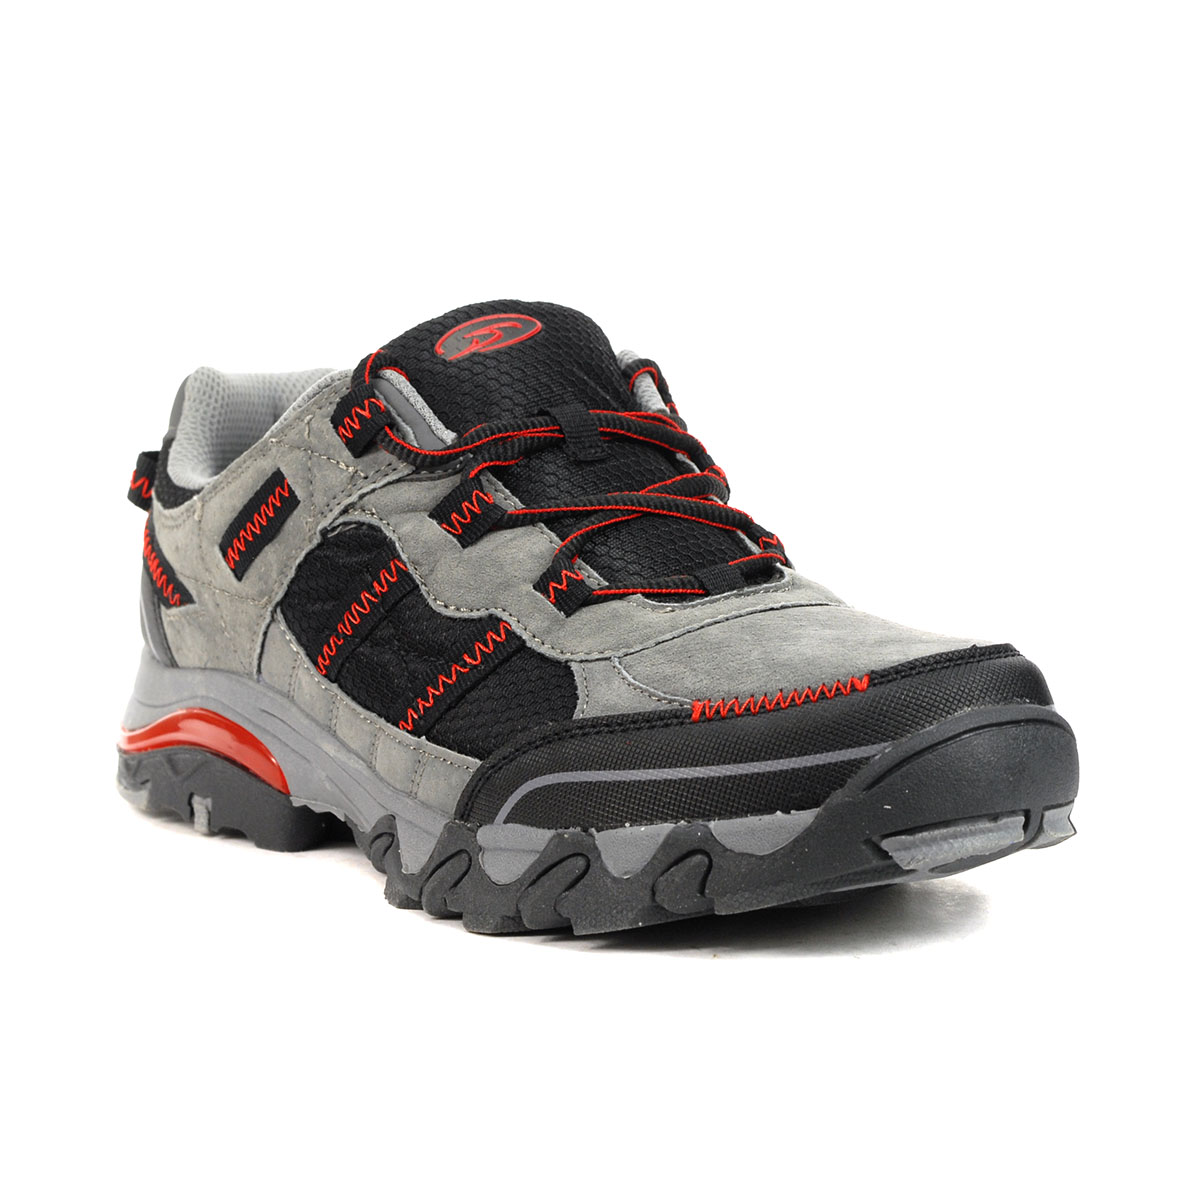 Dr. Scholl's Men's Canopy Black/Grey Suede Hiking Shoes - WOOKI.COM